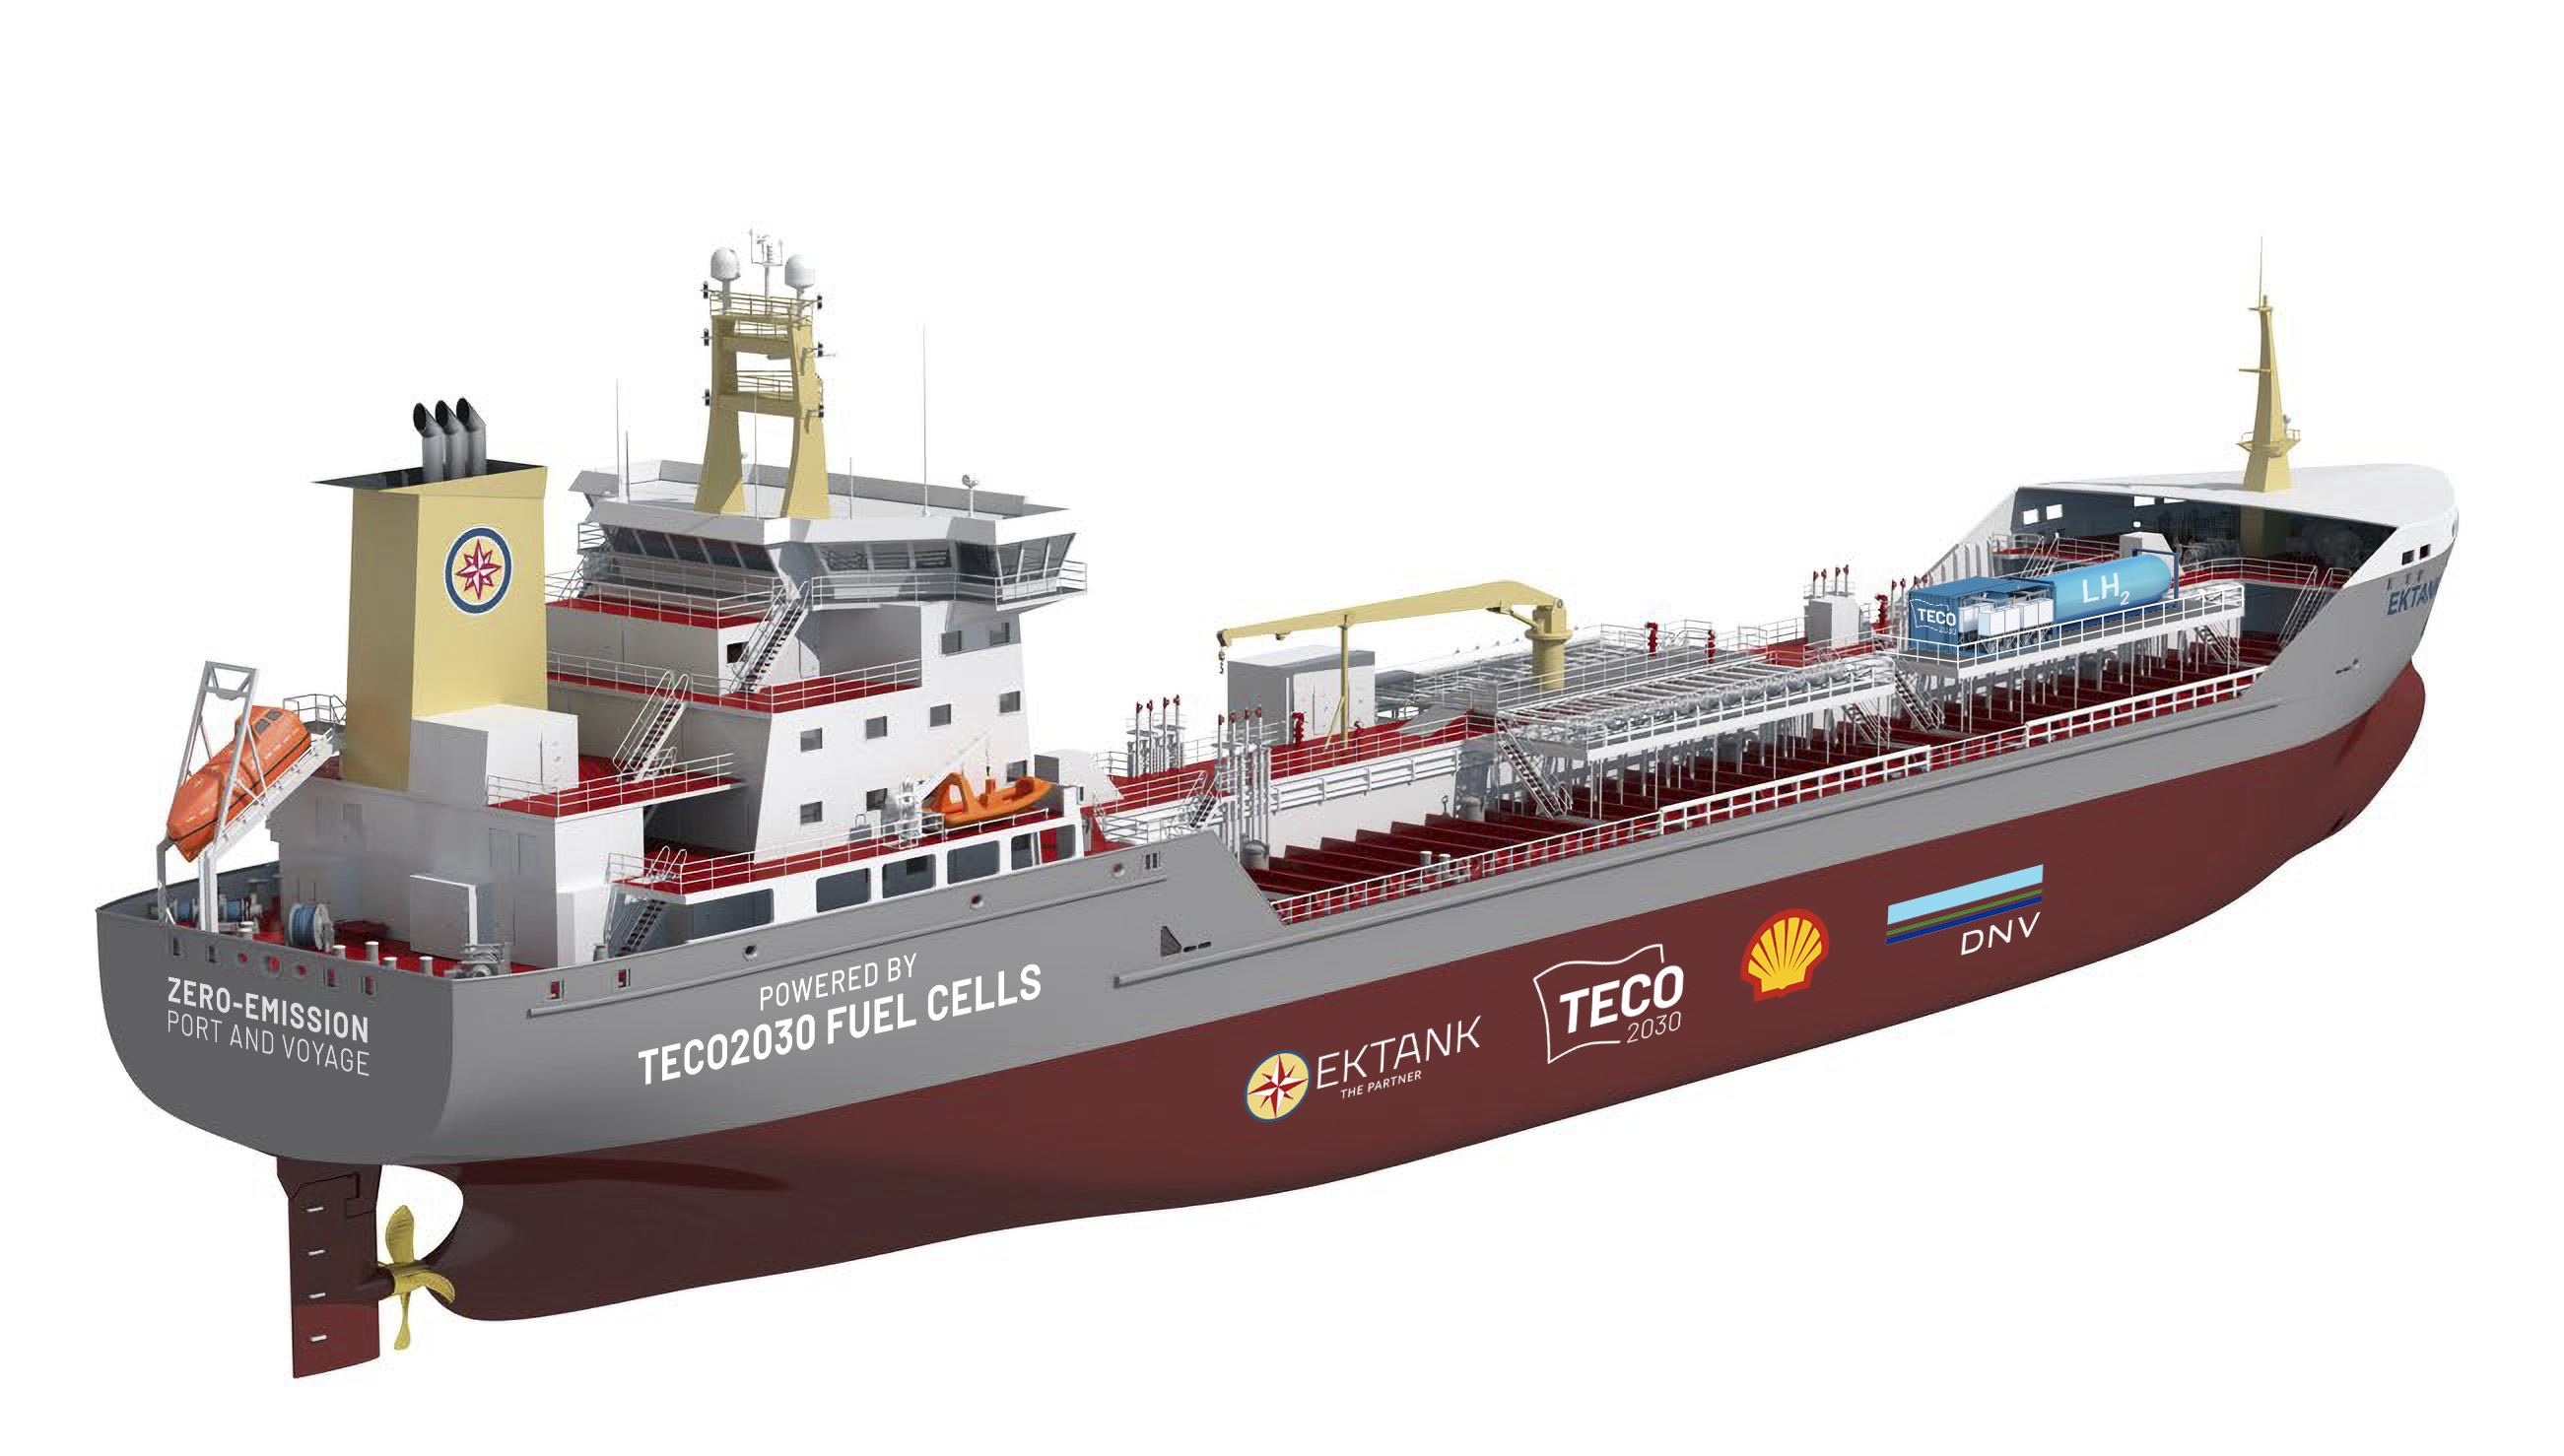 Picture text: Proposed Concept Hy-Ekotank. Retrofit installation of fuel cells with compressed or liquid hydrogen storage on existing Ektank vessels. The solution will eliminate emissions in port and reduce up to 100% of GHG emissions on voyages.